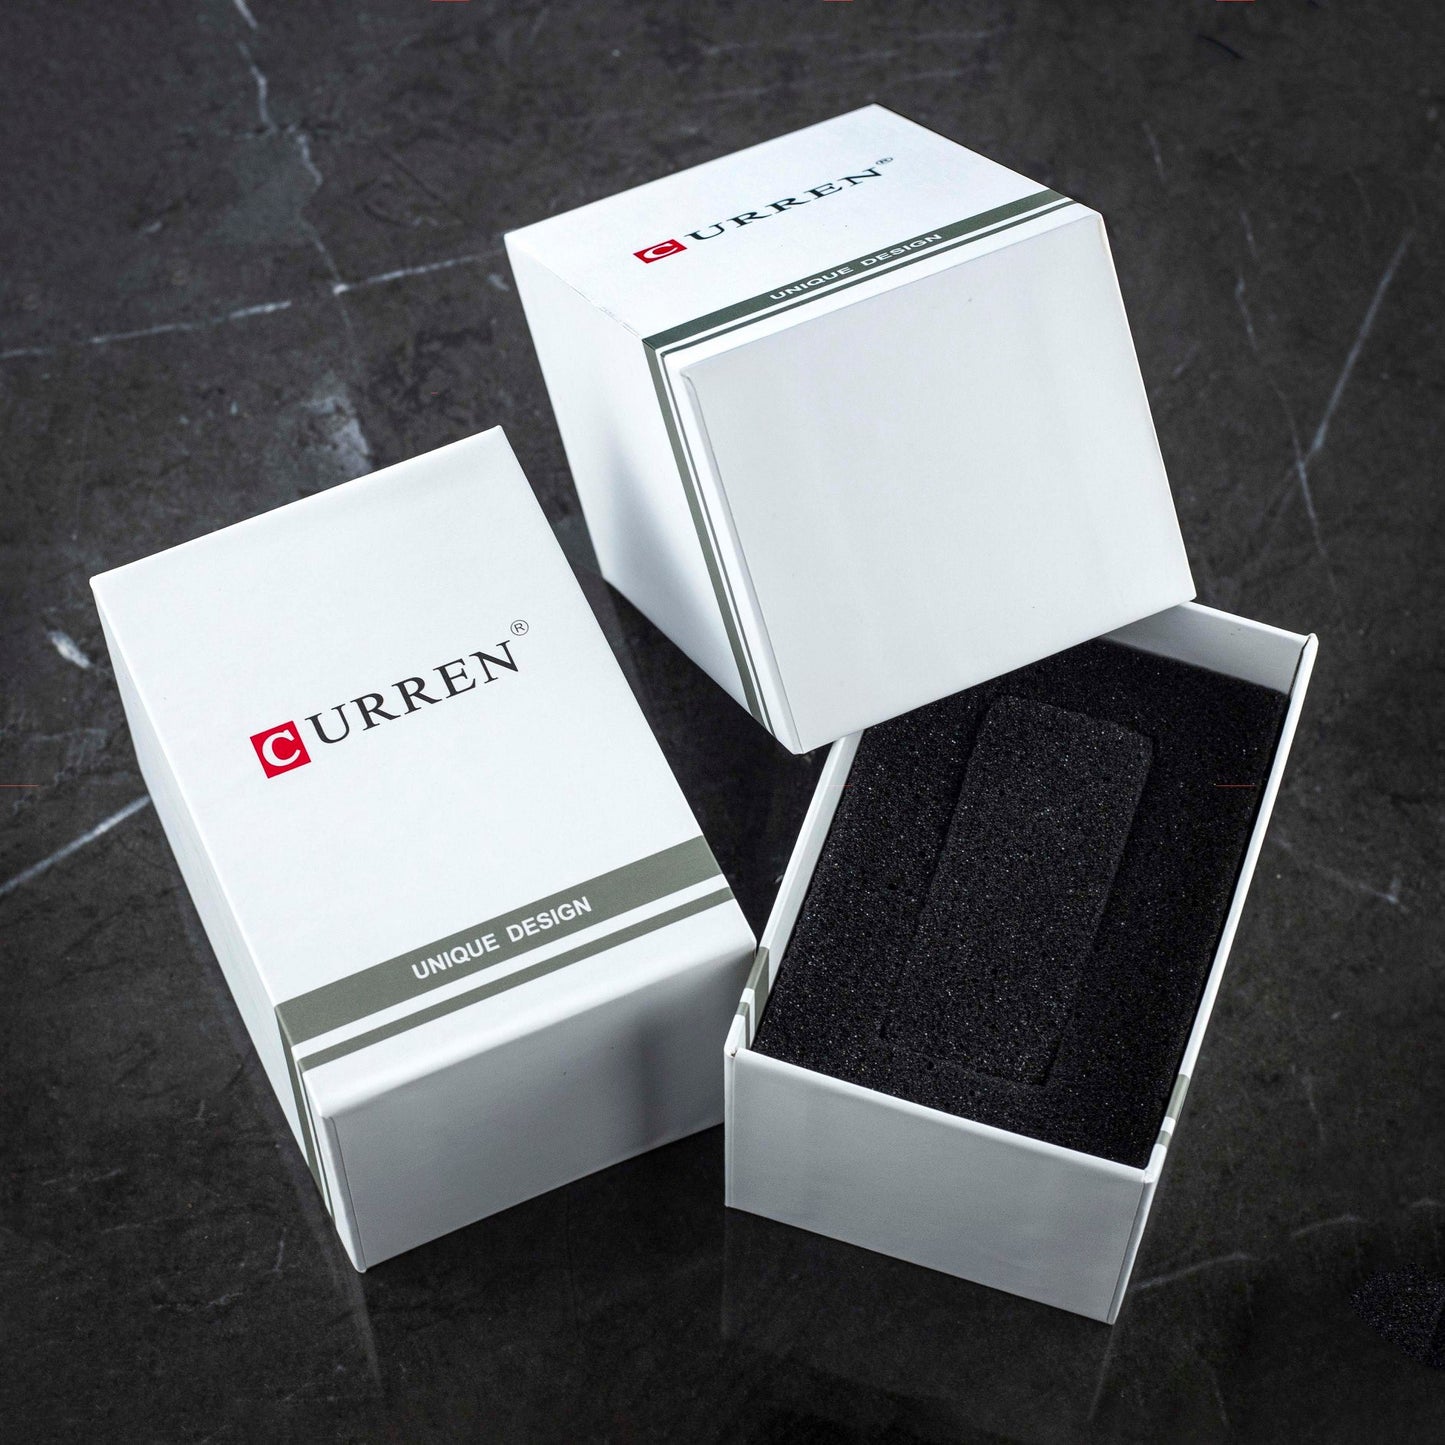 CURREN Original Brand Watch And Gift Box With Carry Bag (Size: 11cm - 7.7cm - 7.2cm)